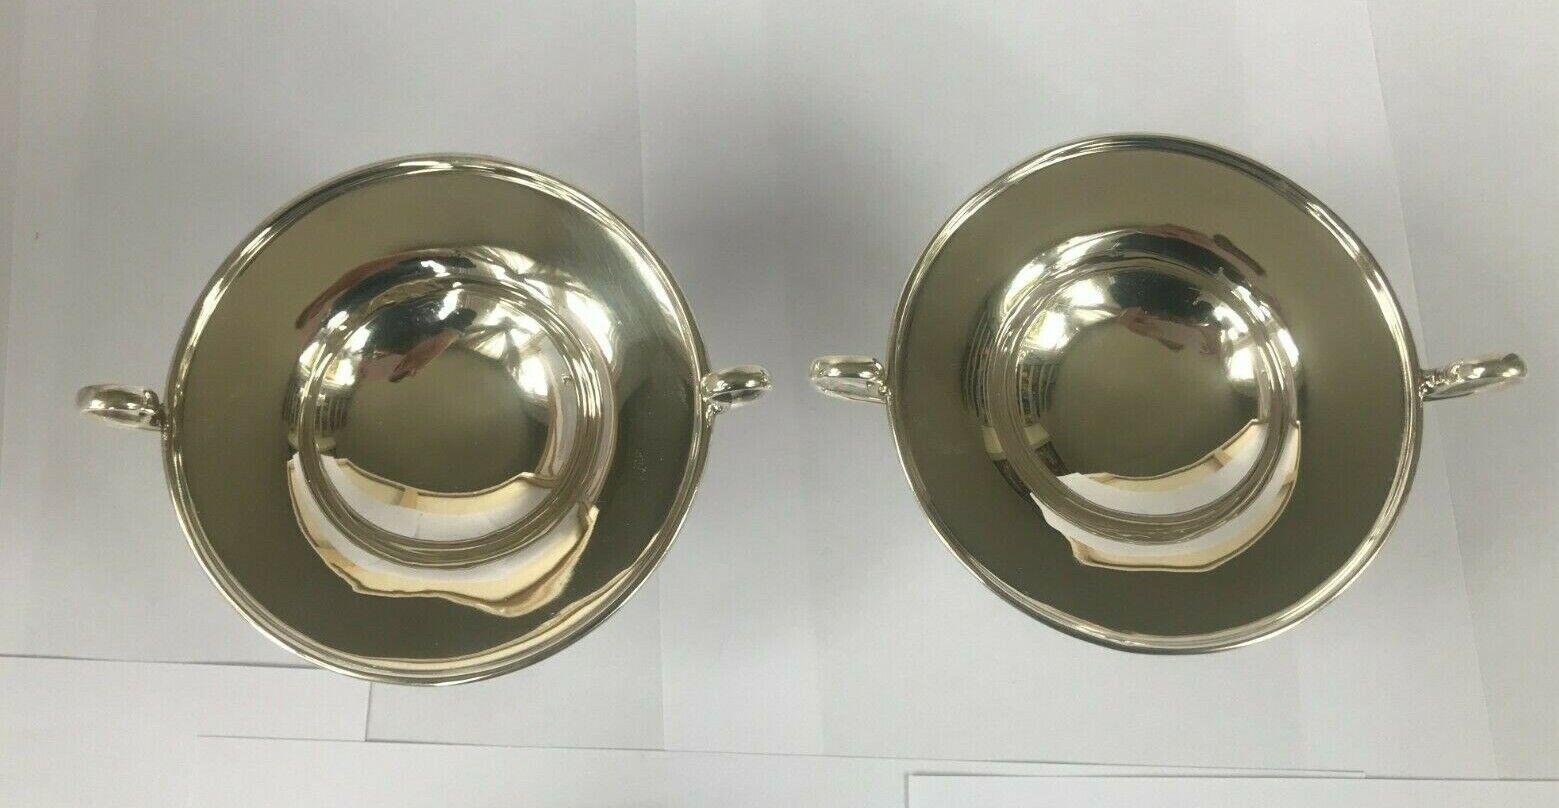 Pair of Sterling Silver Bonbon Dishes by Holland, Aldwinckle & Slater, 1903 For Sale 1